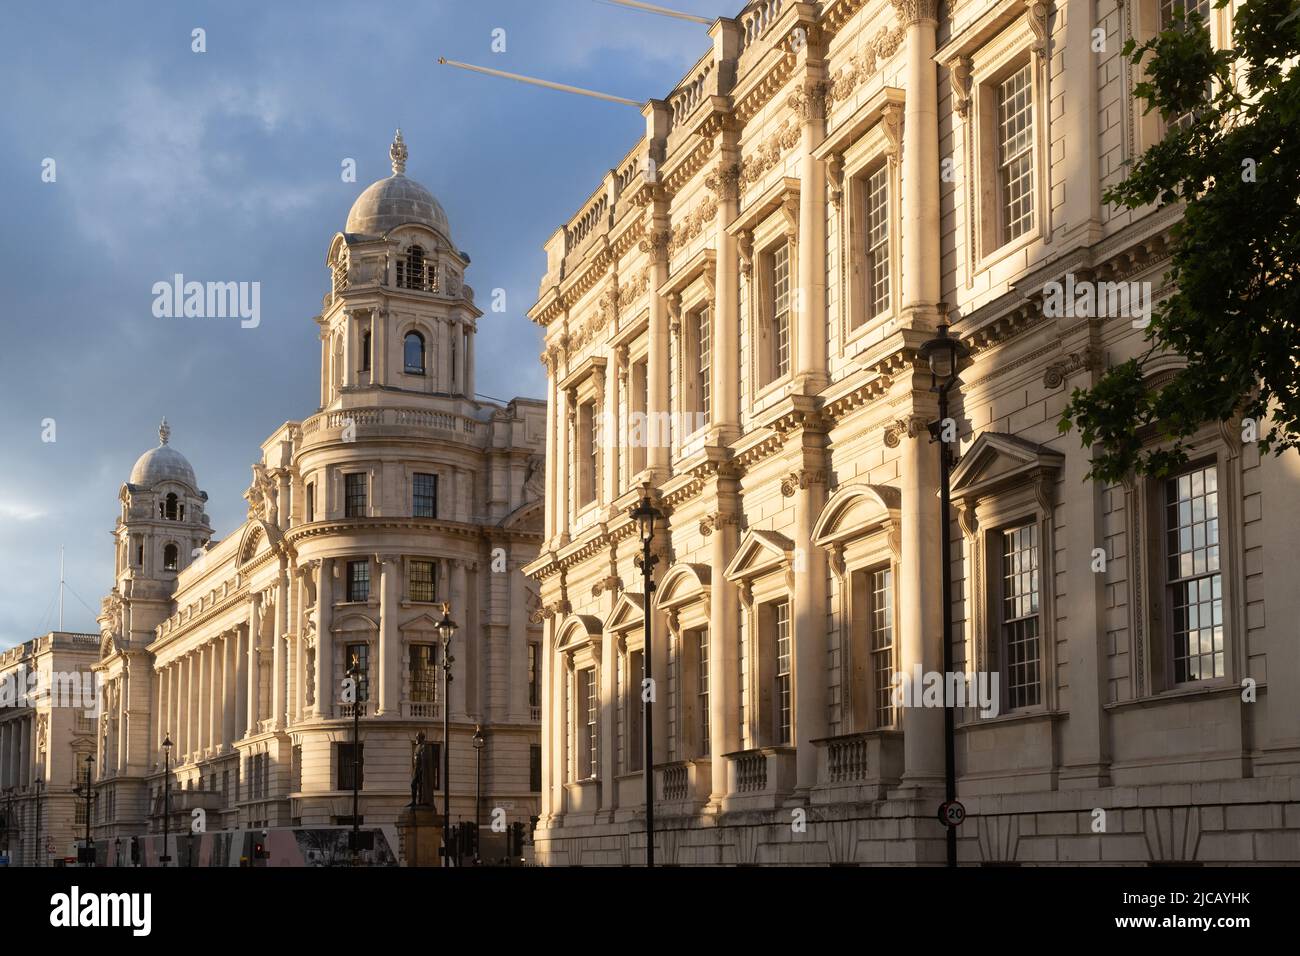 The Banqueting House, Whitehall, London, England Stock Photo